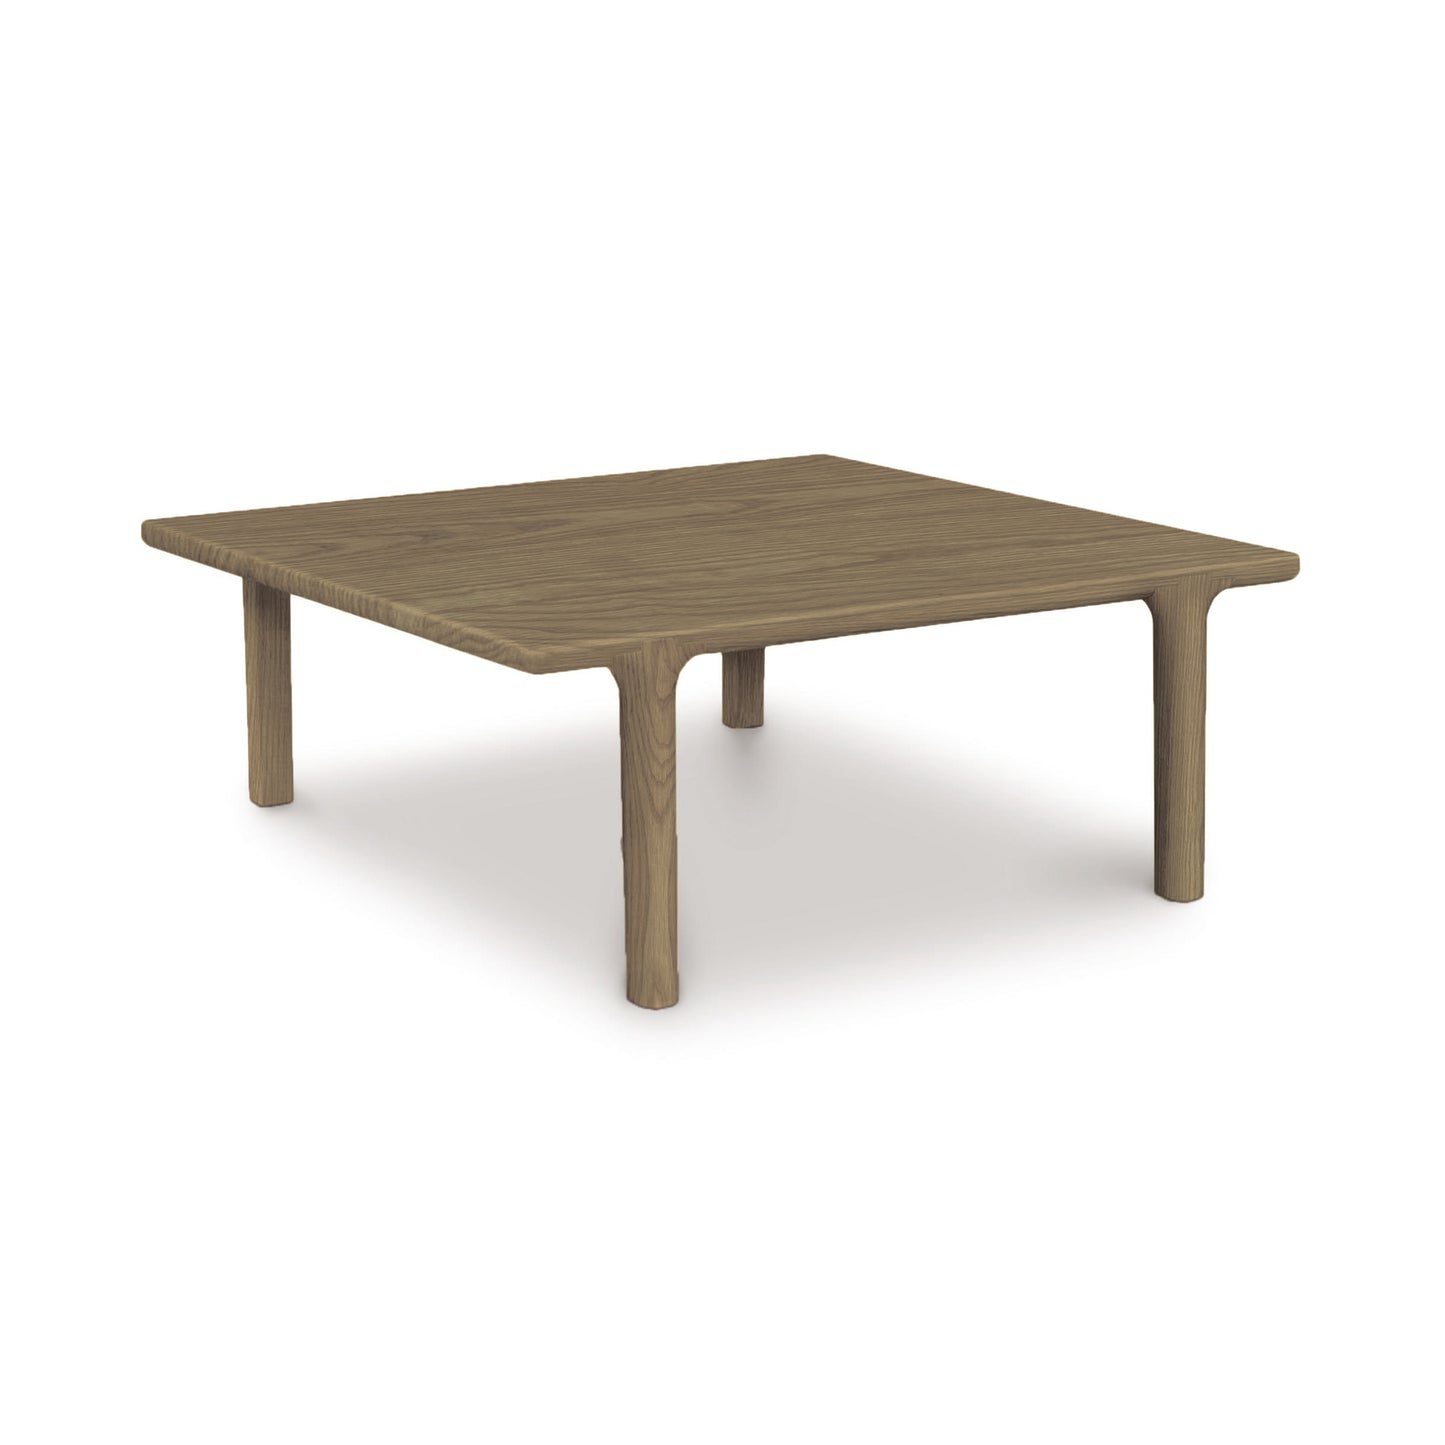 A Sierra Square Coffee Table by Copeland Furniture on a white background.